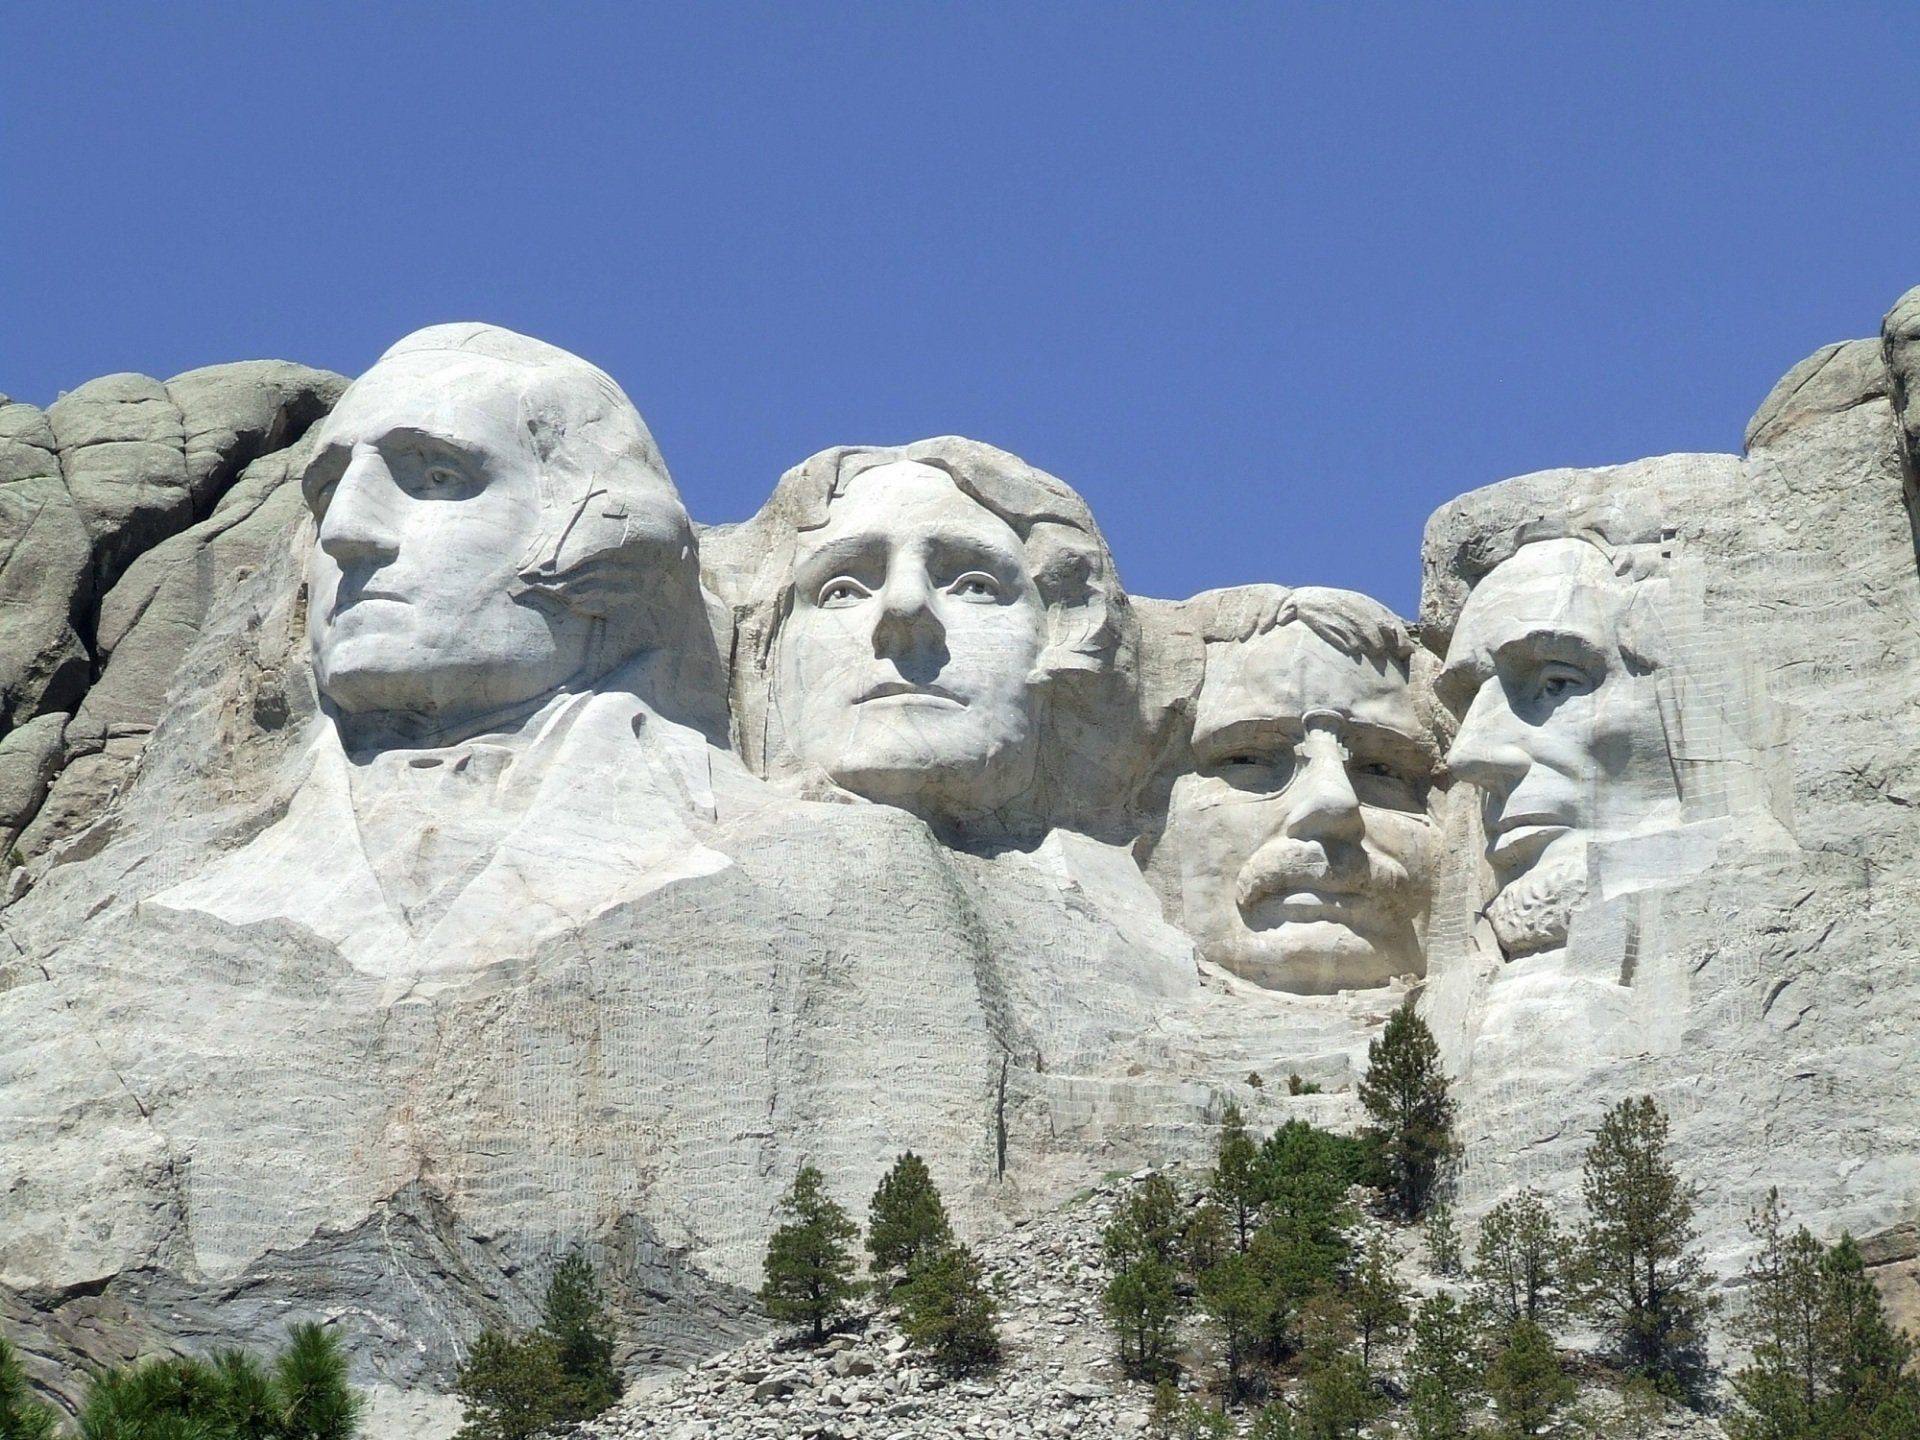 The four presidents of the united states are carved into a mountain